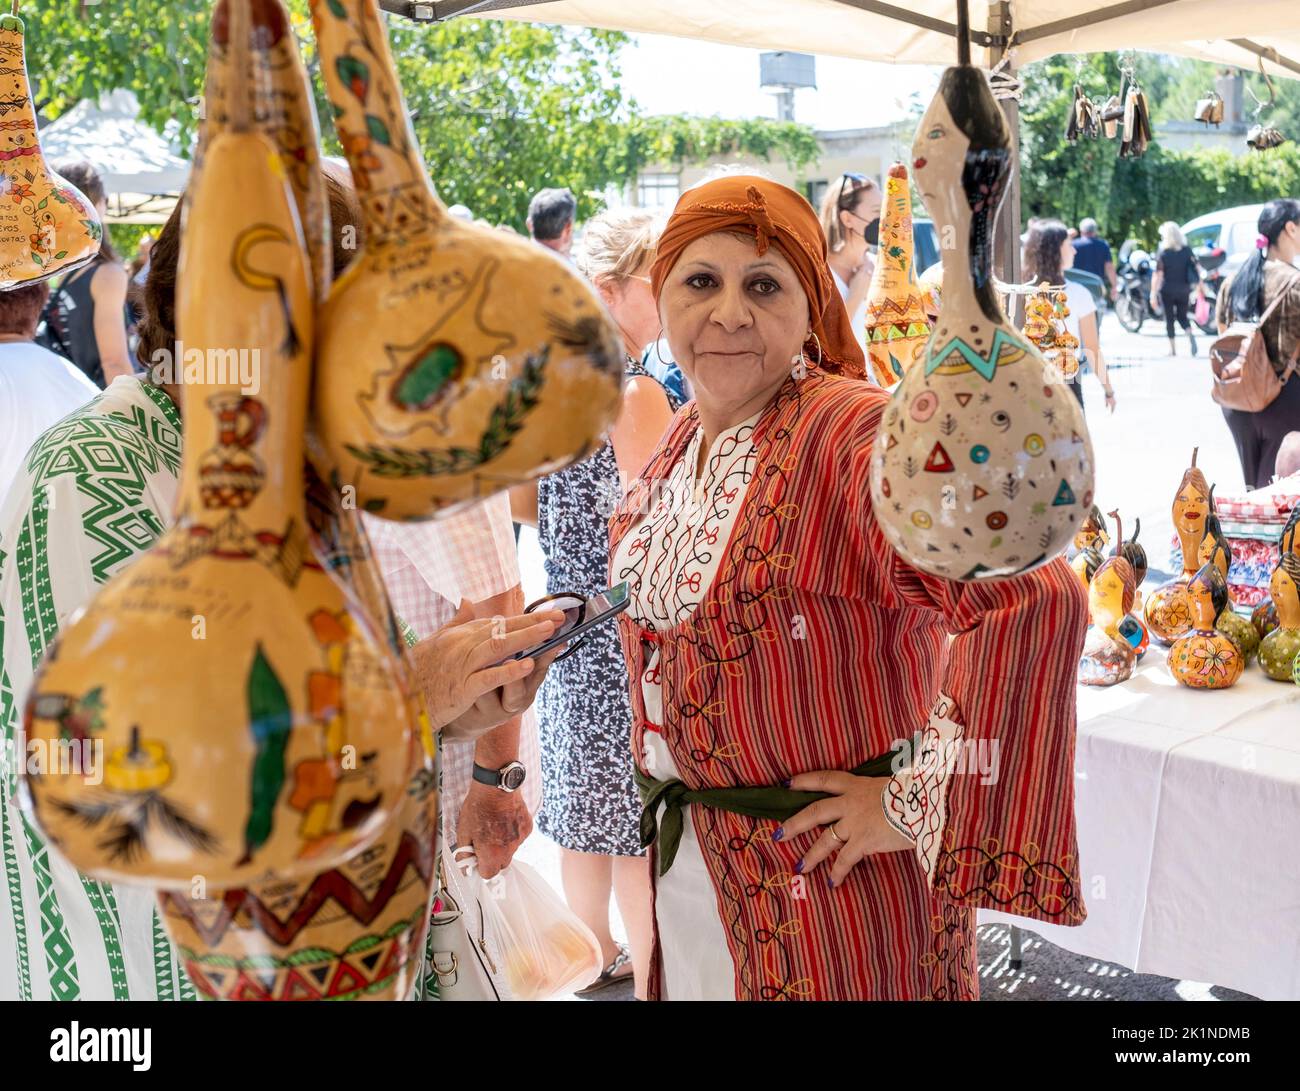 Cypriot women in traditional dress at the Statos-Ayios Fotios Rural Festival, Republic of Cyprus. Stock Photo